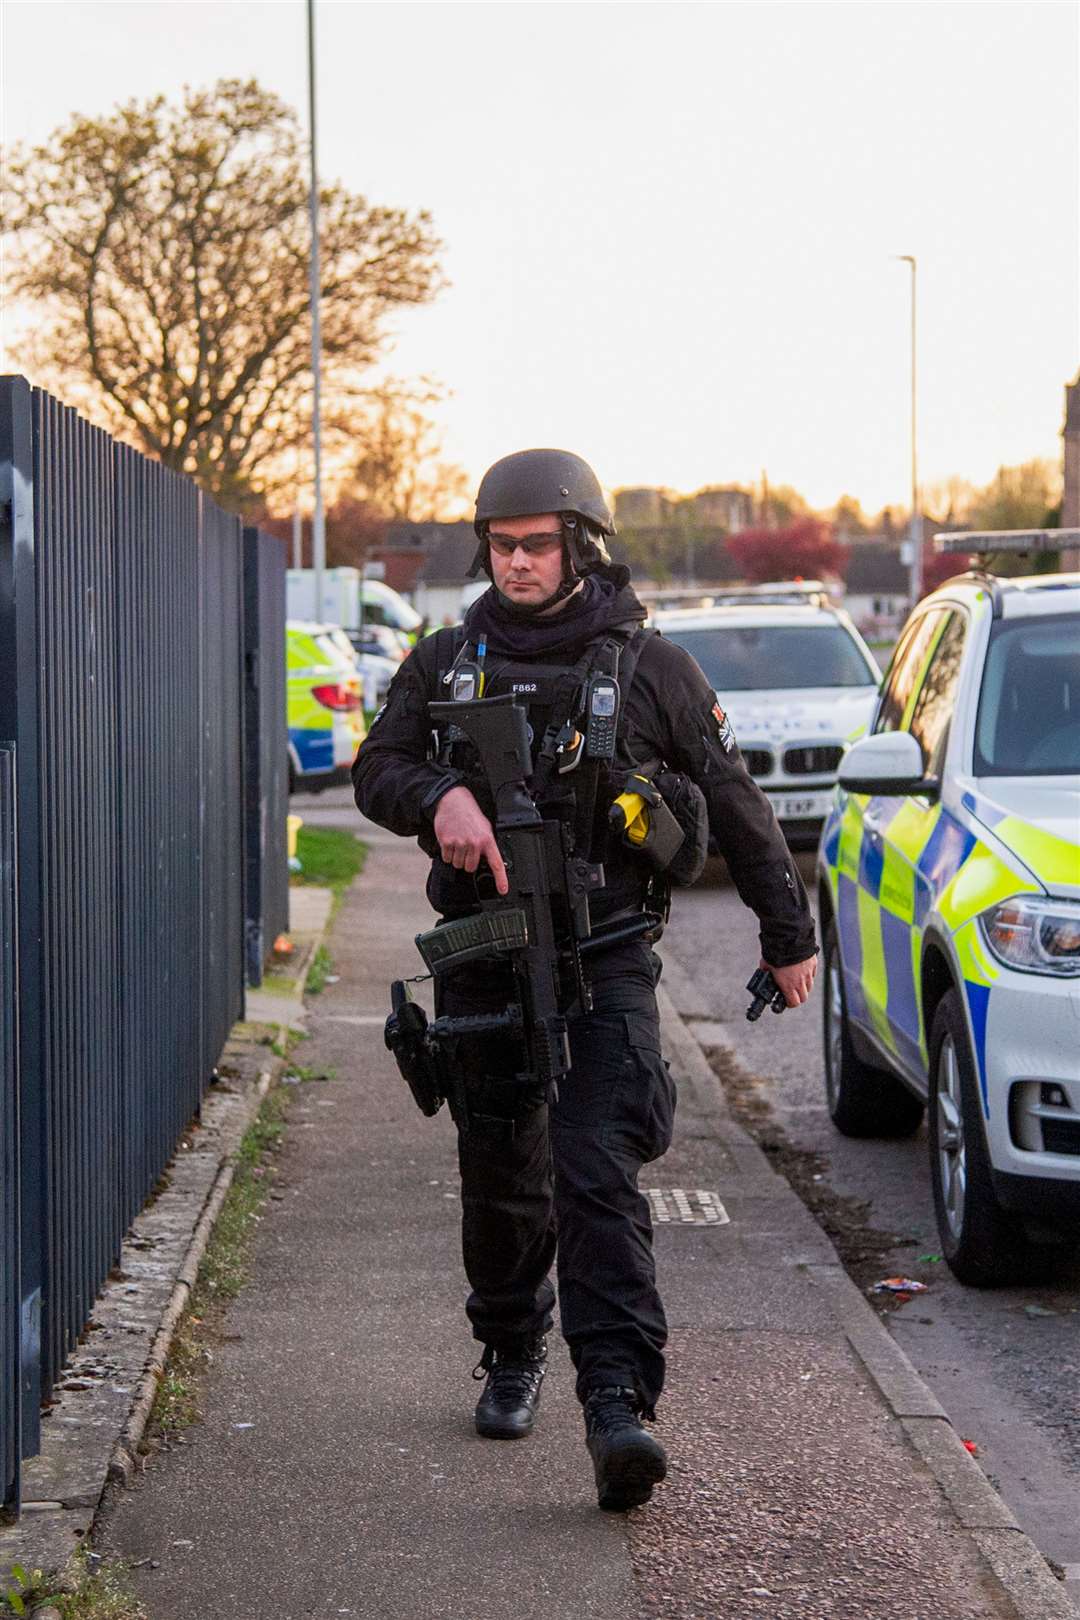 An armed officer at an incident last year. Picture: Highland News & Media.